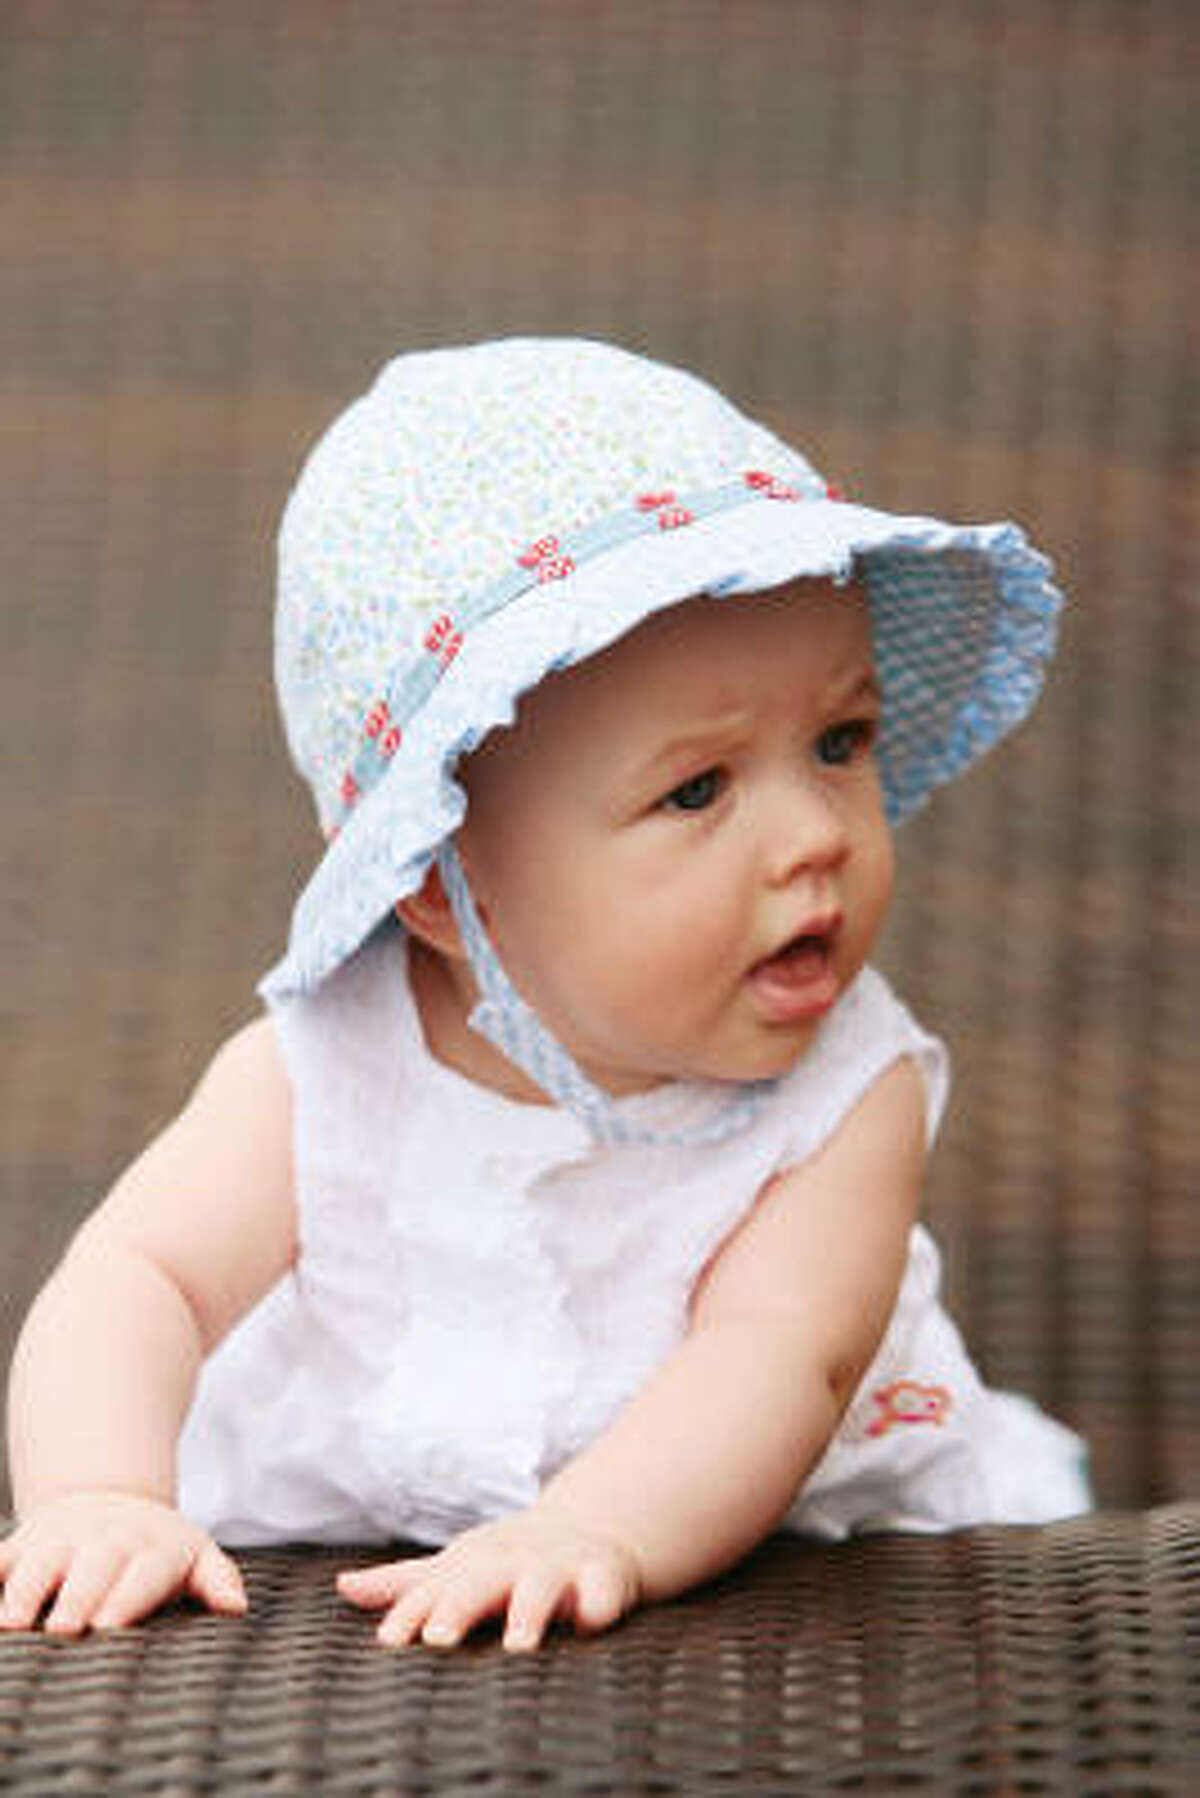 Wallaroo's "Lorikeet" hat for toddlers is as cute and stylish as it is protective.